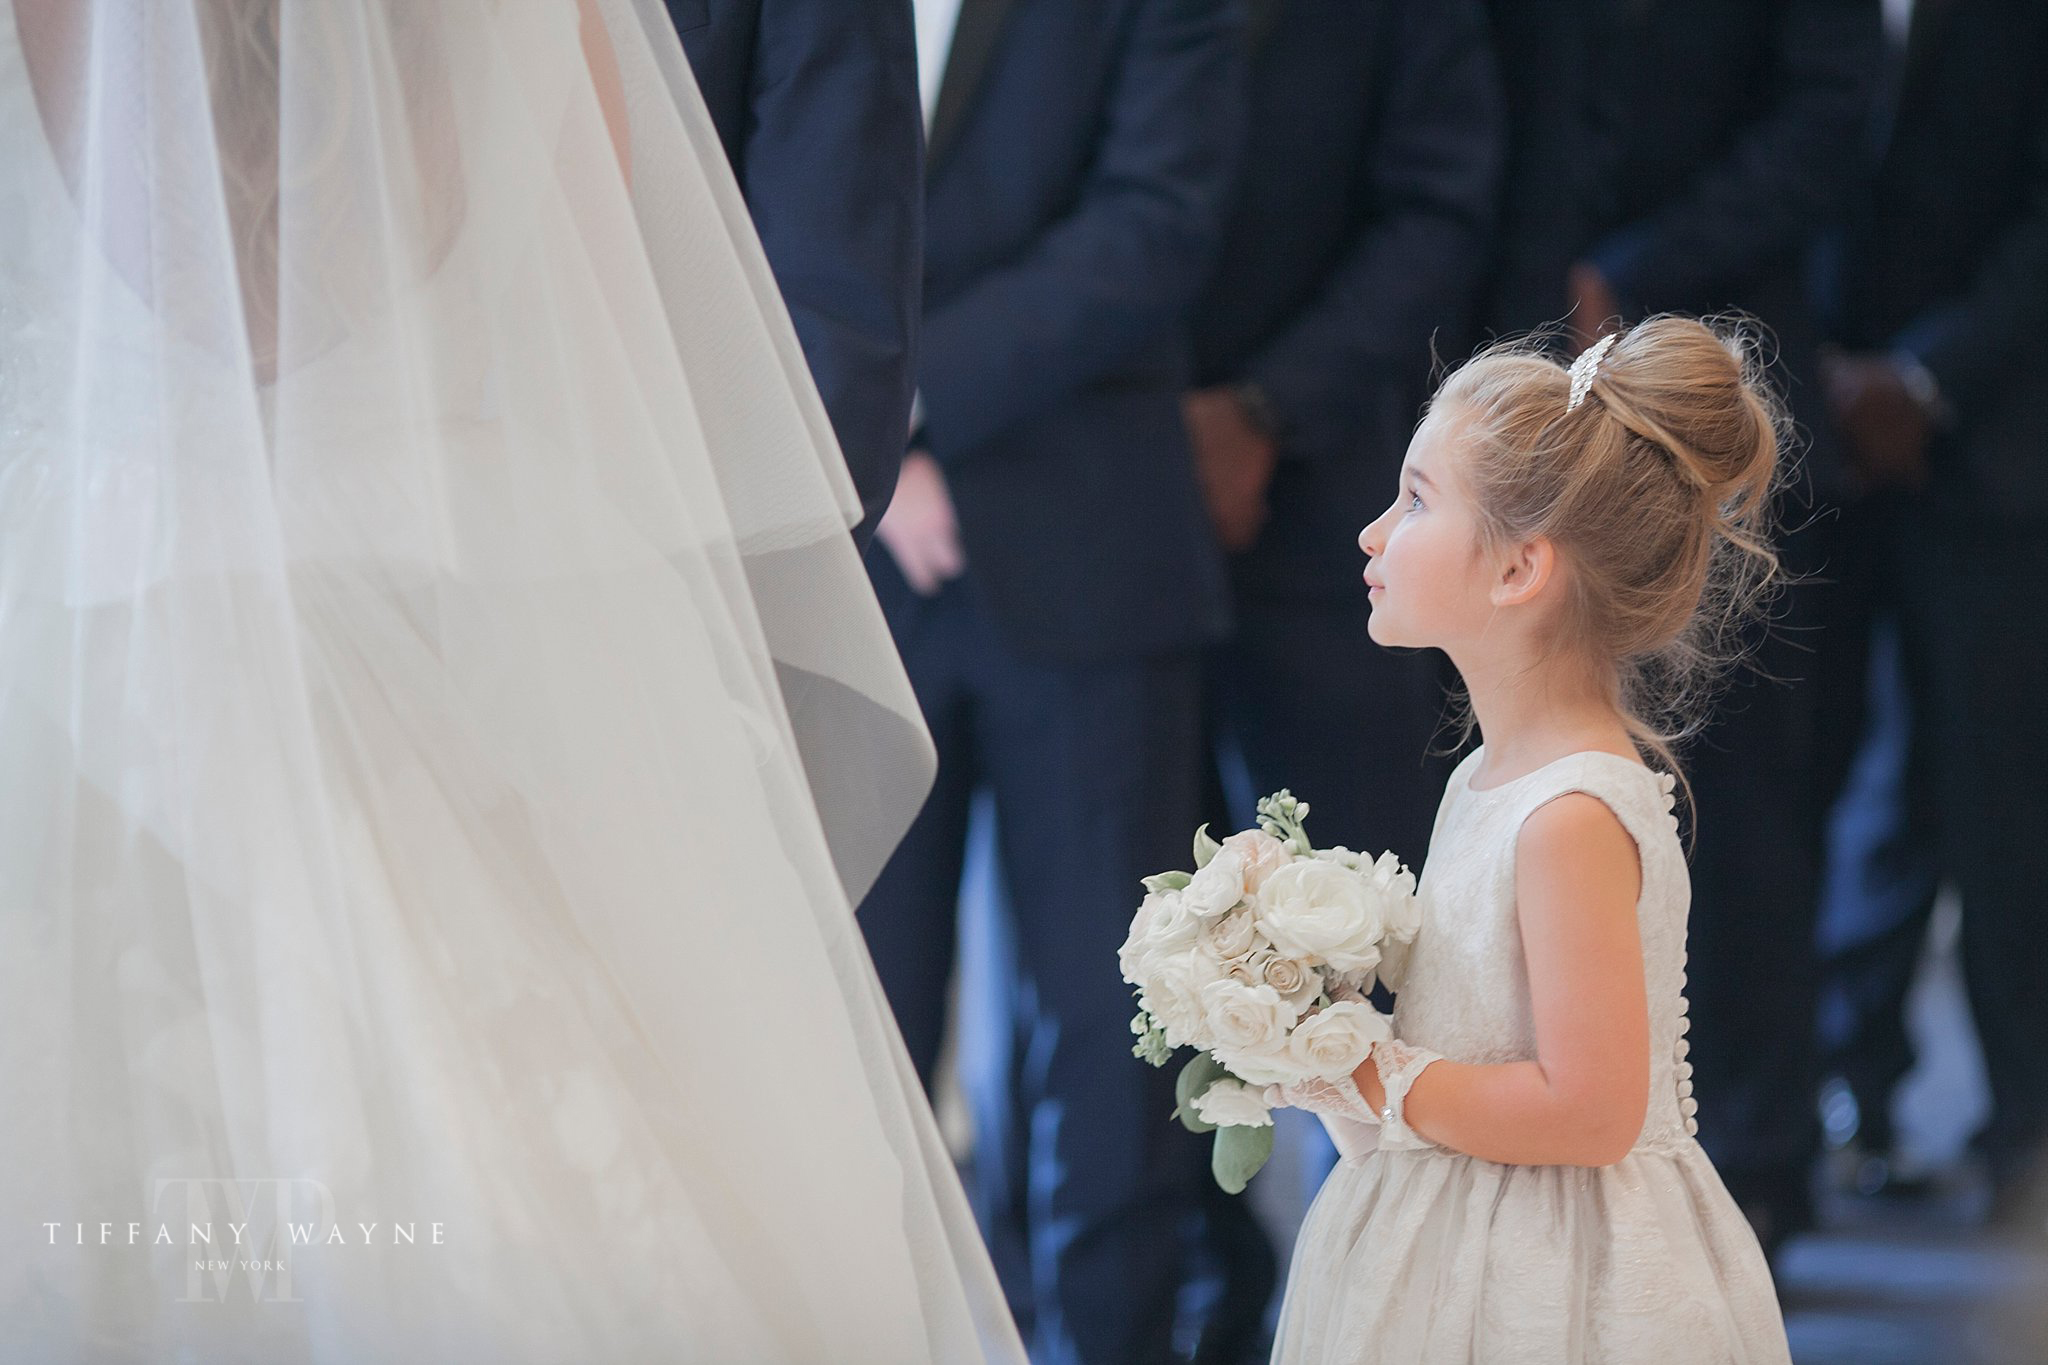 flower girl watches wedding ceremony at Renaissance Hotel photographed by Tiffany Wayne Photography